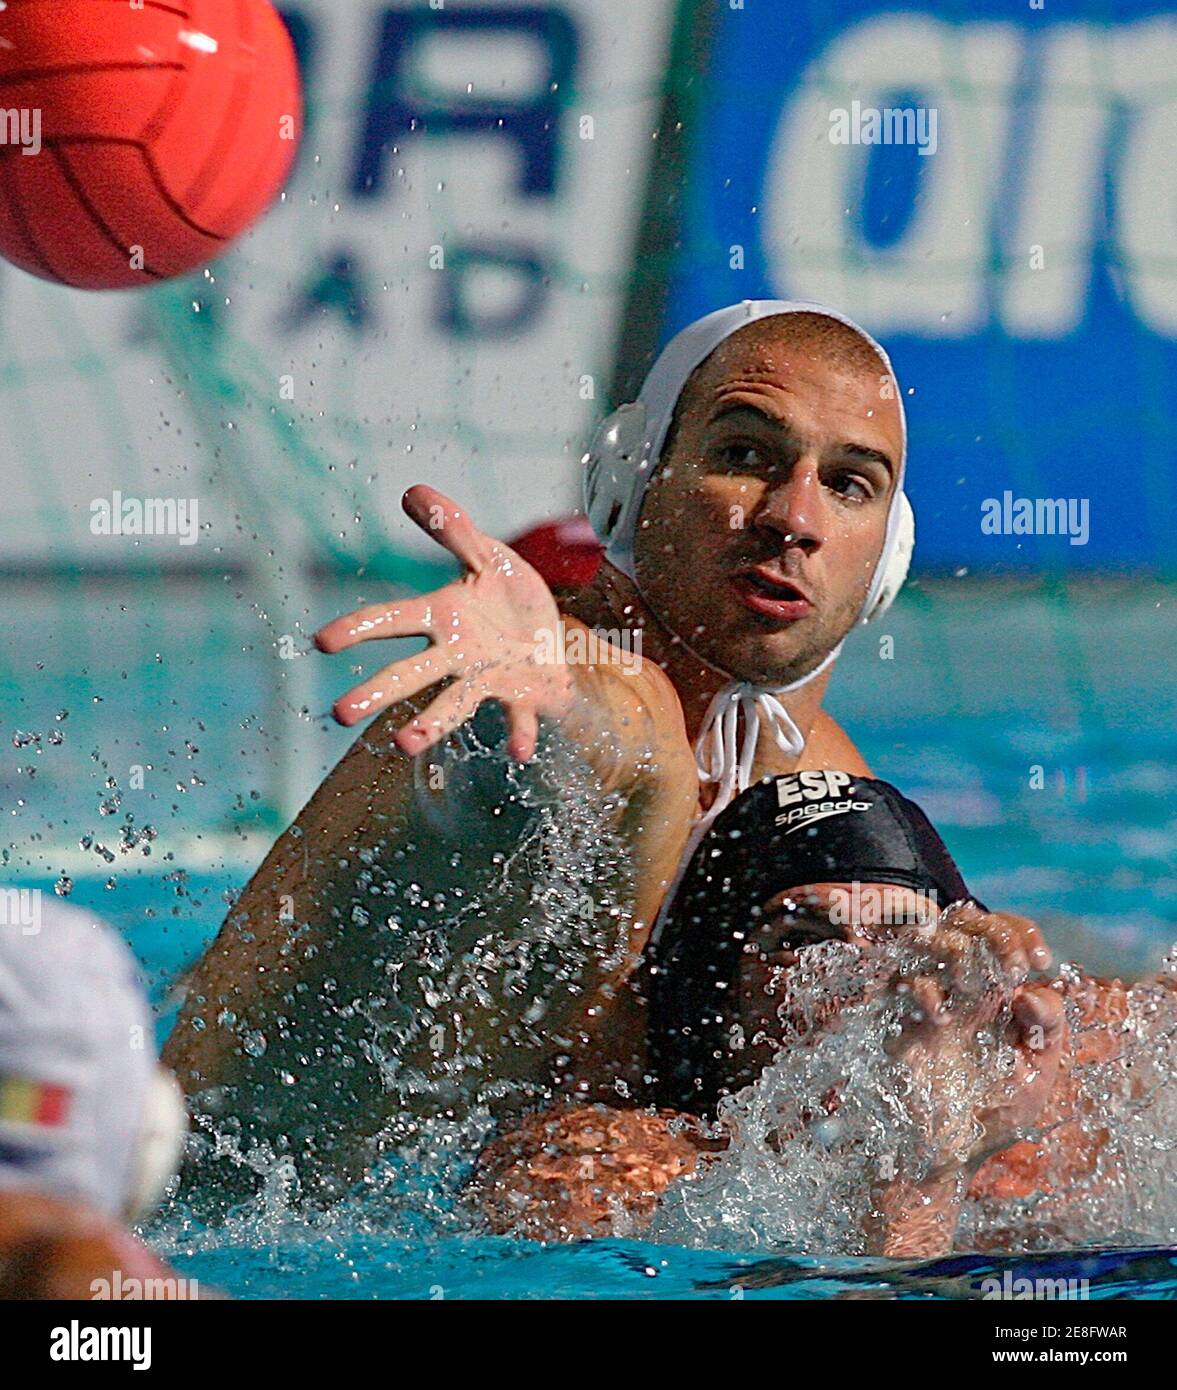 Romania's Florin Musat (L) struggles for the ball with Spain's Guillermo Molina during their bronze medal match in the water polo European Championship in Belgrade September 10, 2006.  REUTERS/Ivan Milutinovic (SERBIA) Stock Photo